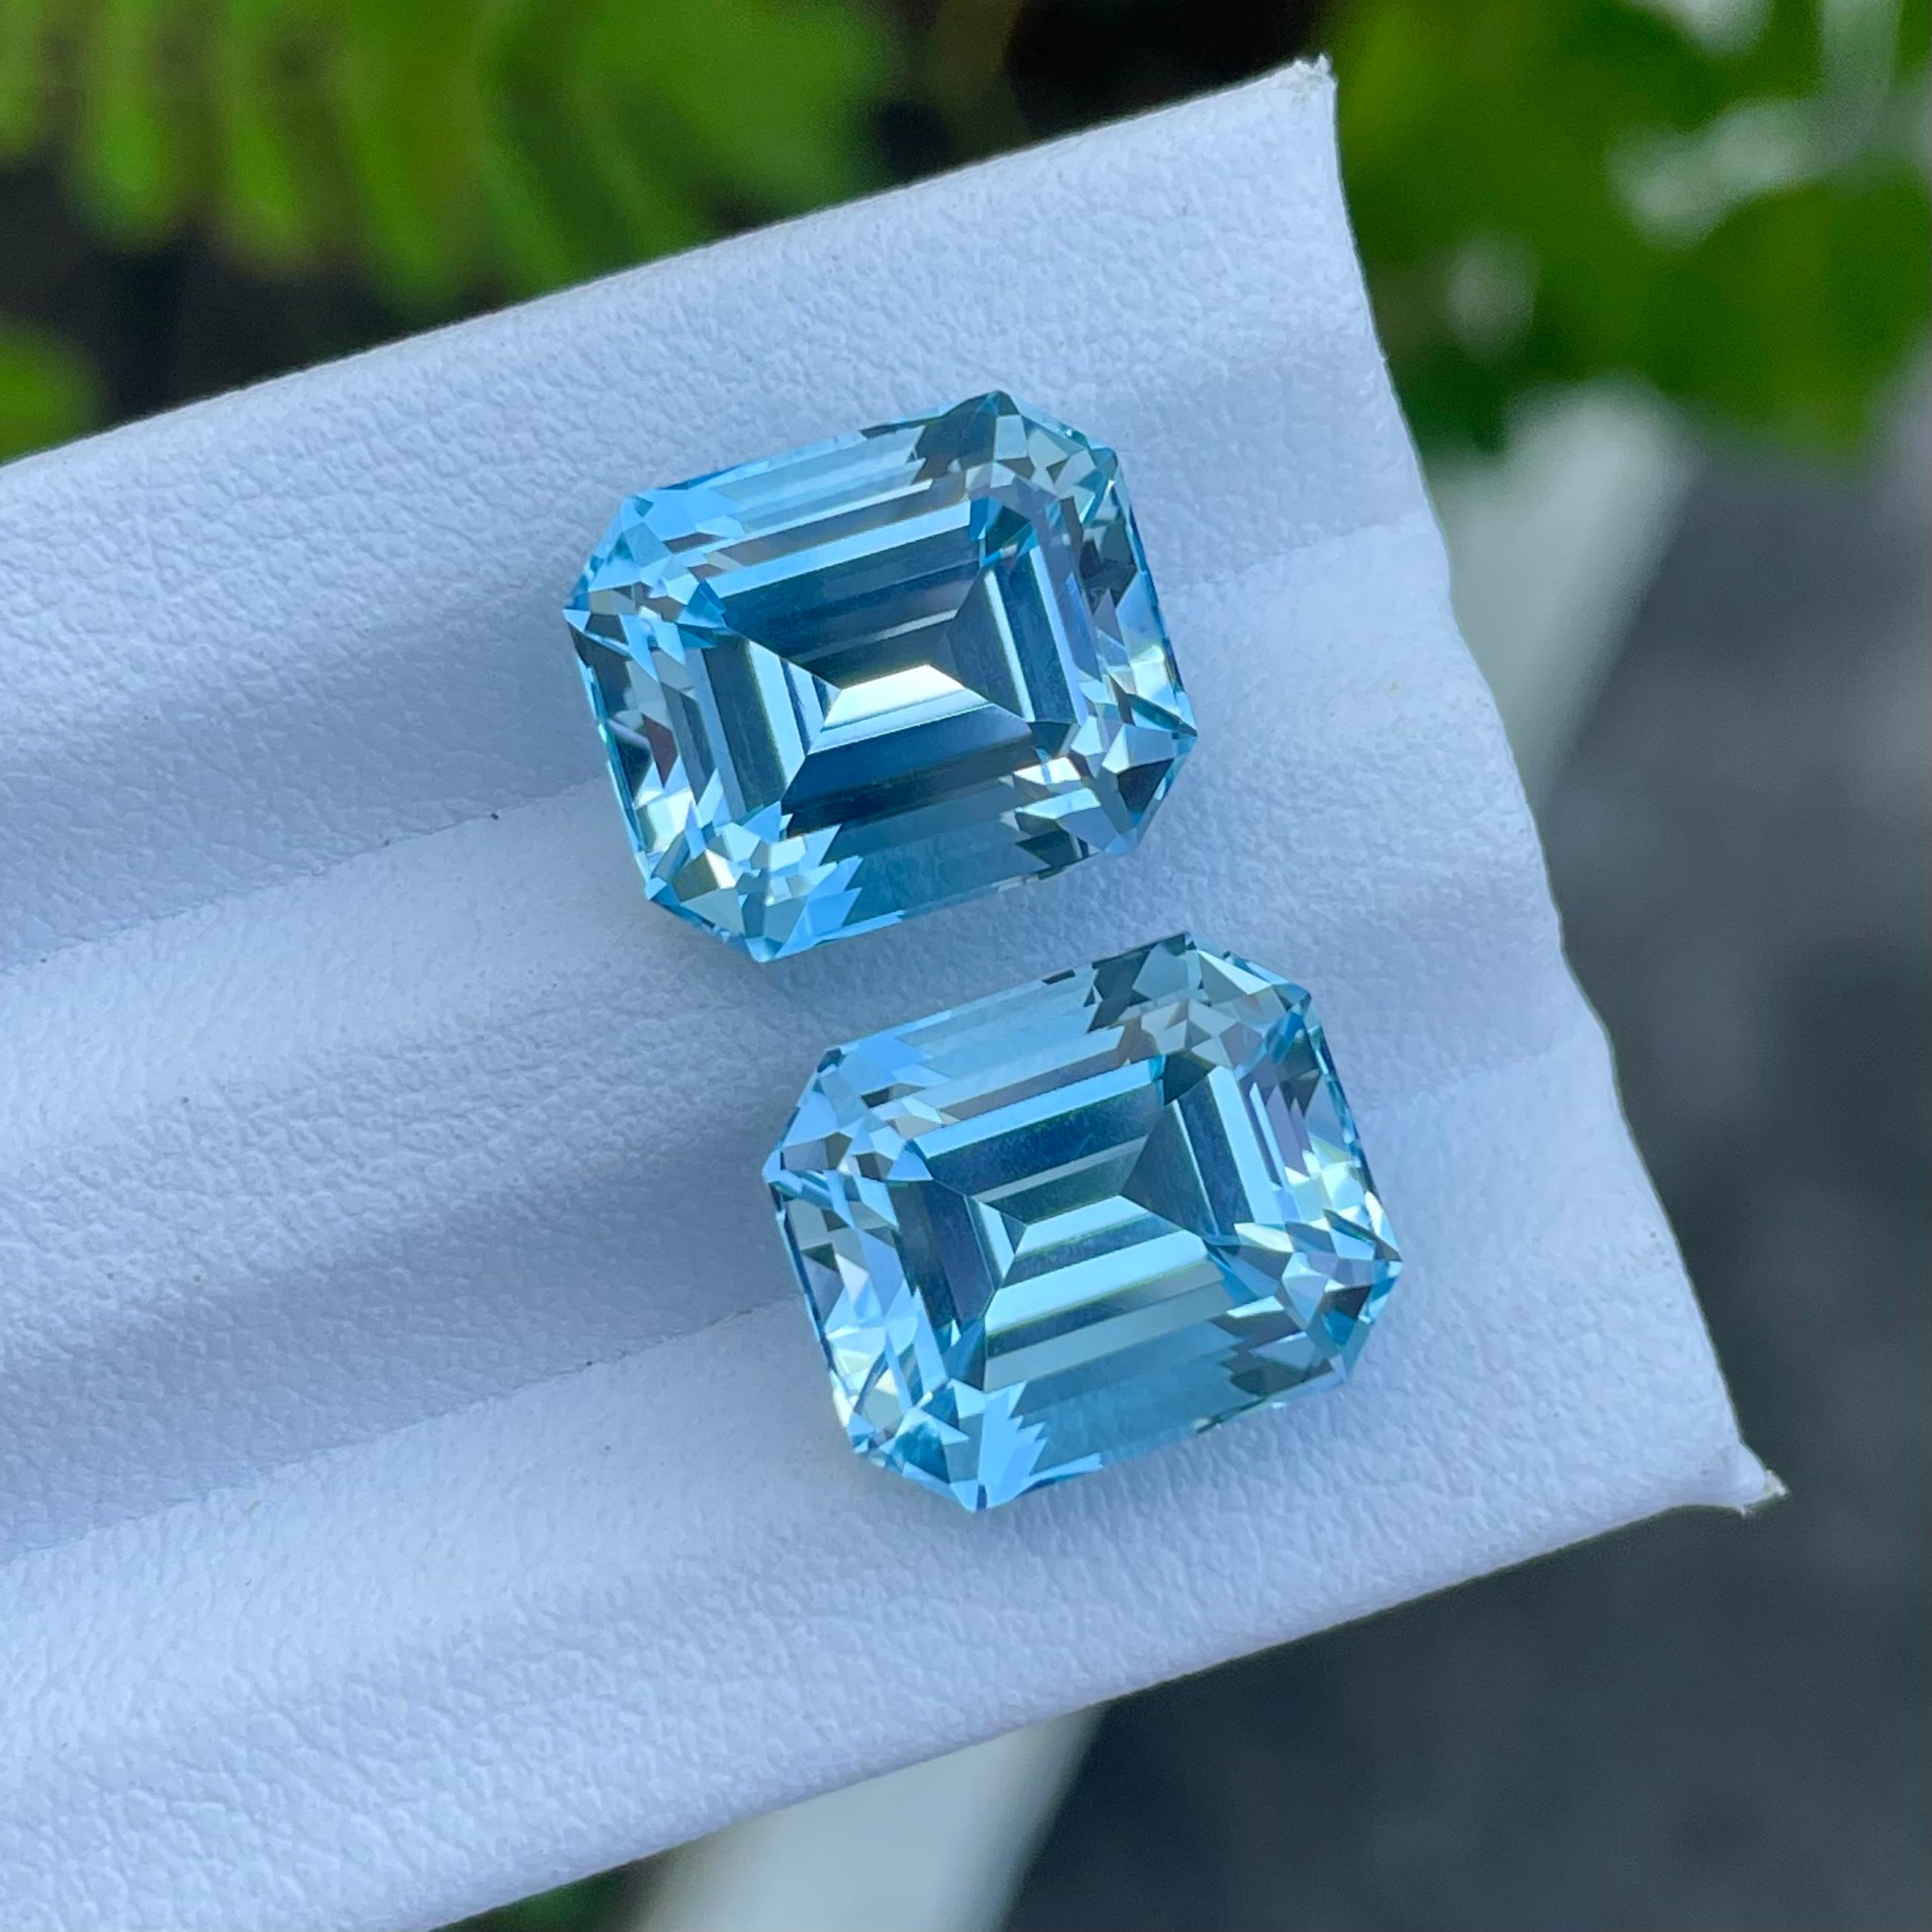 Weight 20.65 carats 
Dimensions 12.4 x 10.3 x 9.1 mm
Treatment Heated 
Origin Madagascar
Clarity Loupe Clean 
Shape Octagon 
Cut Emerald 



Experience the stunning allure of this Swiss Blue Topaz pair, boasting a combined weight of 20.65 carats.